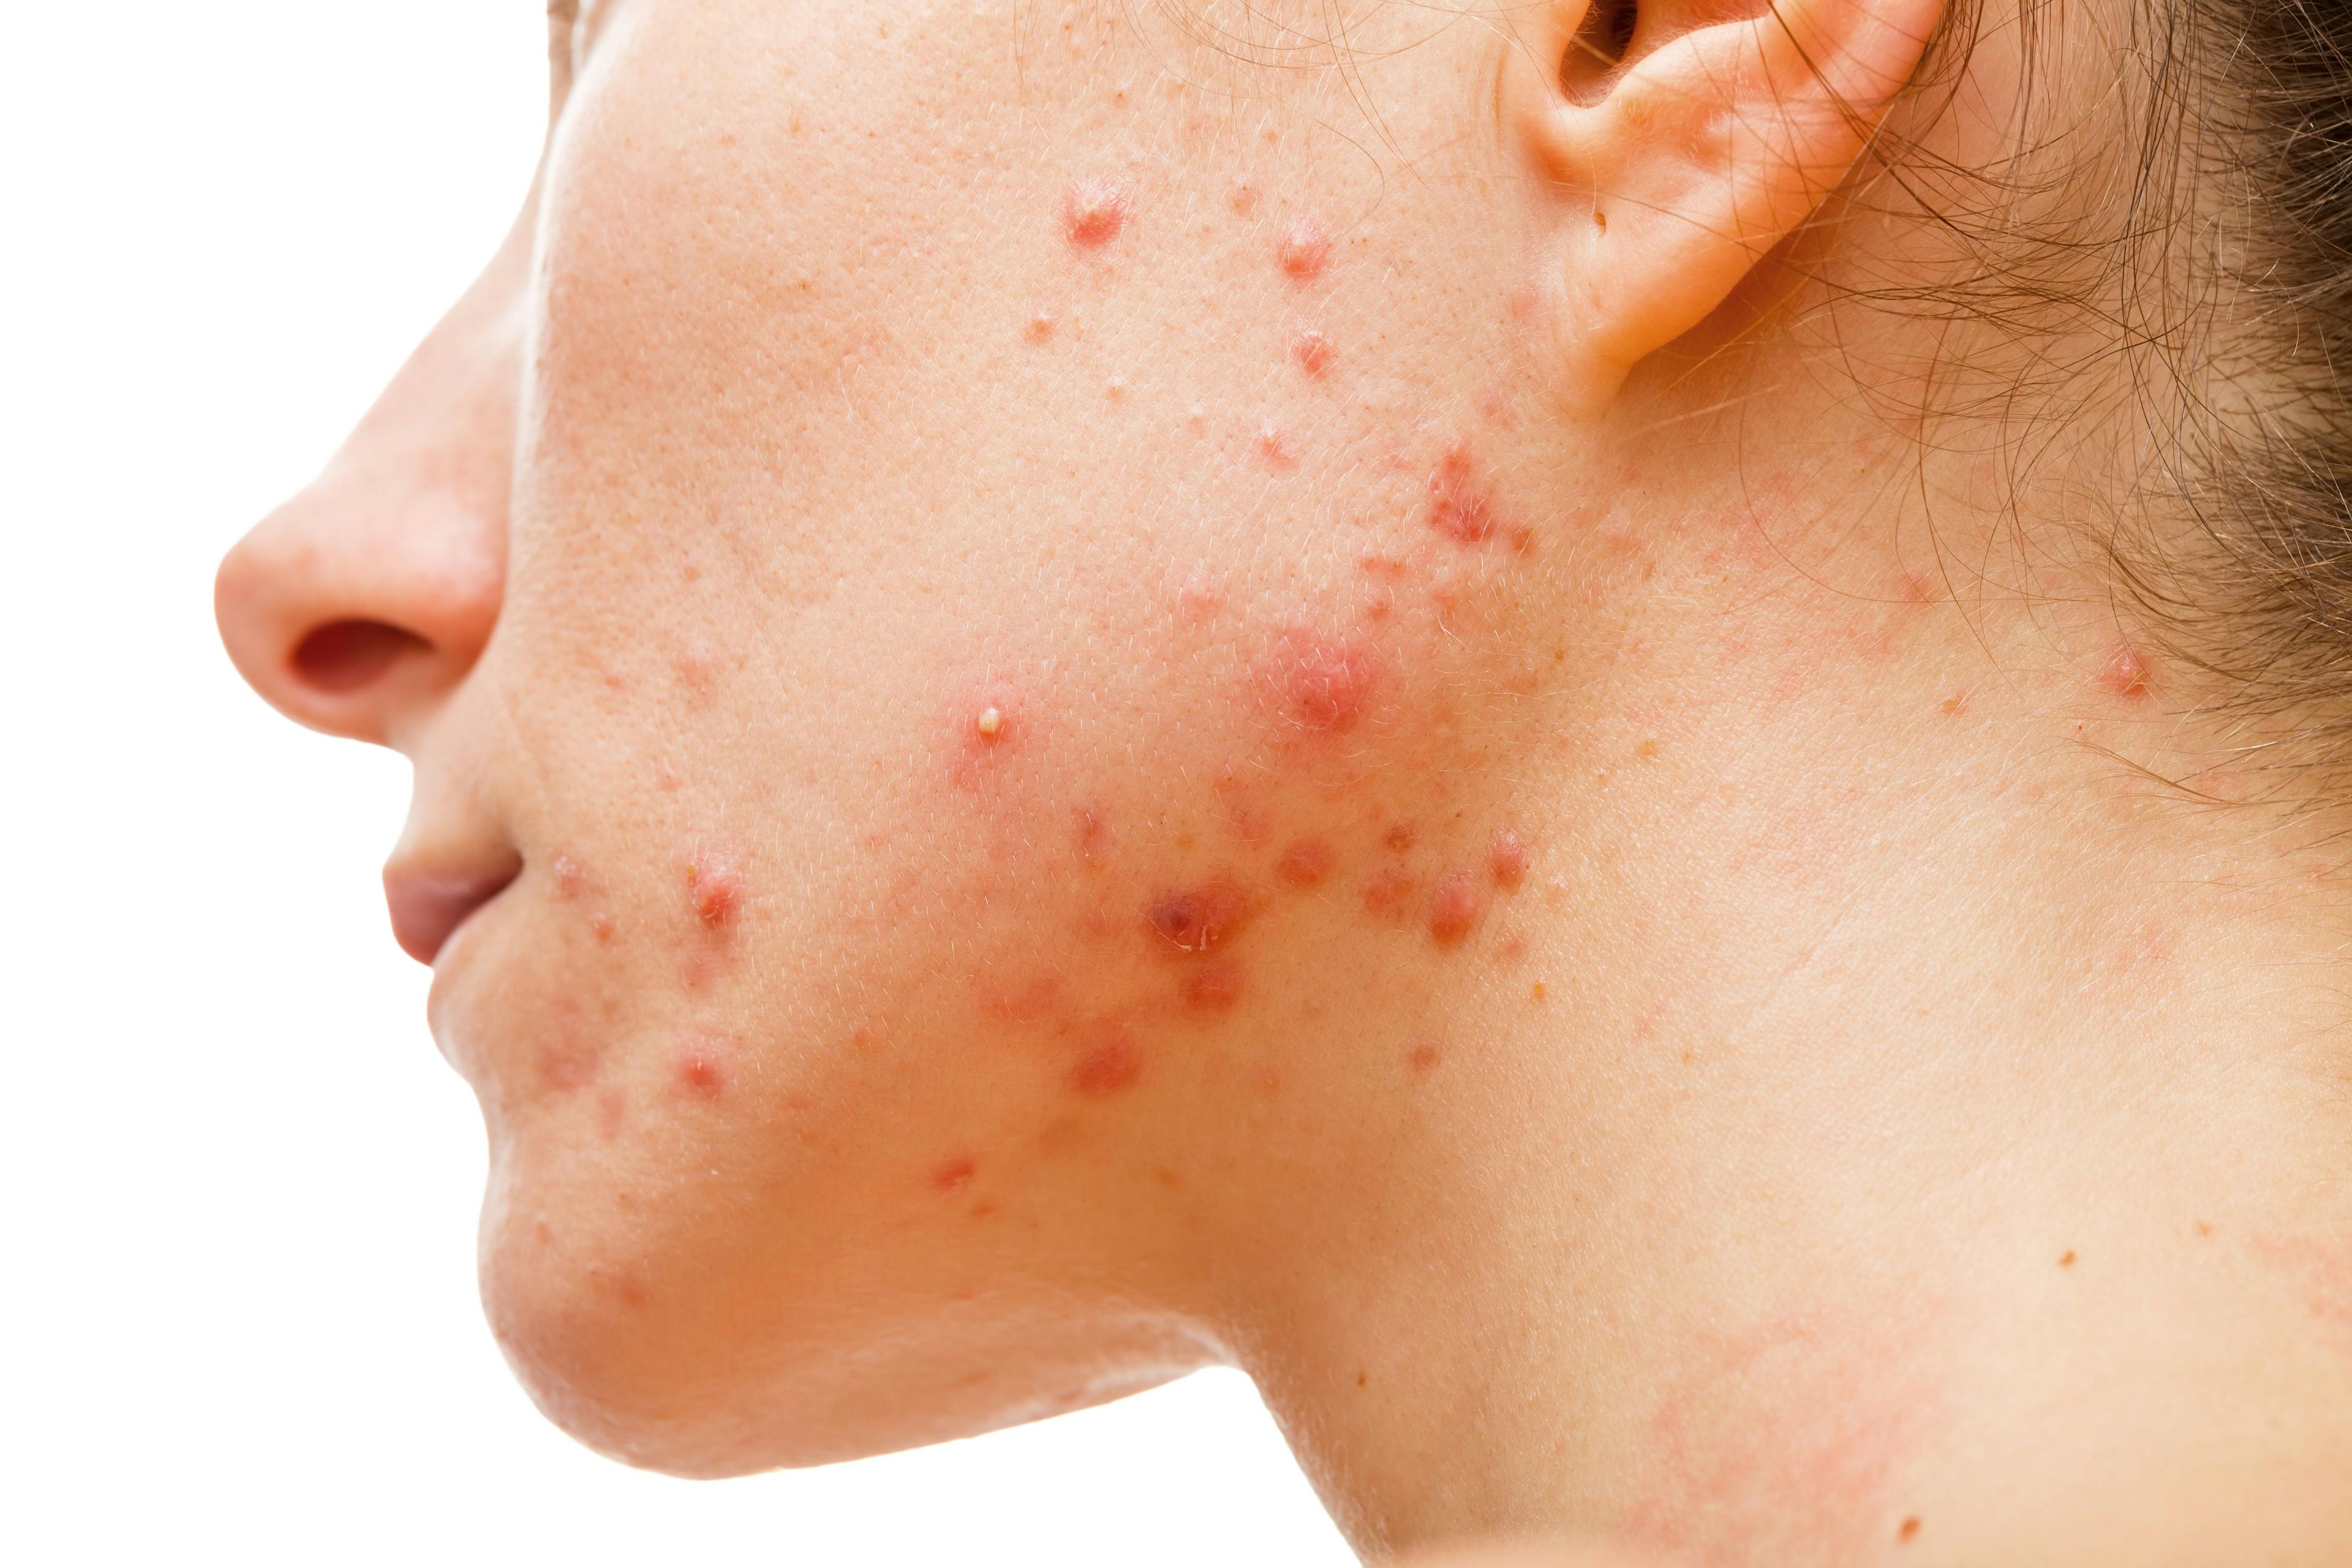 Panel Discusses Treating Acne, Psoriasis in Dermatology Patients